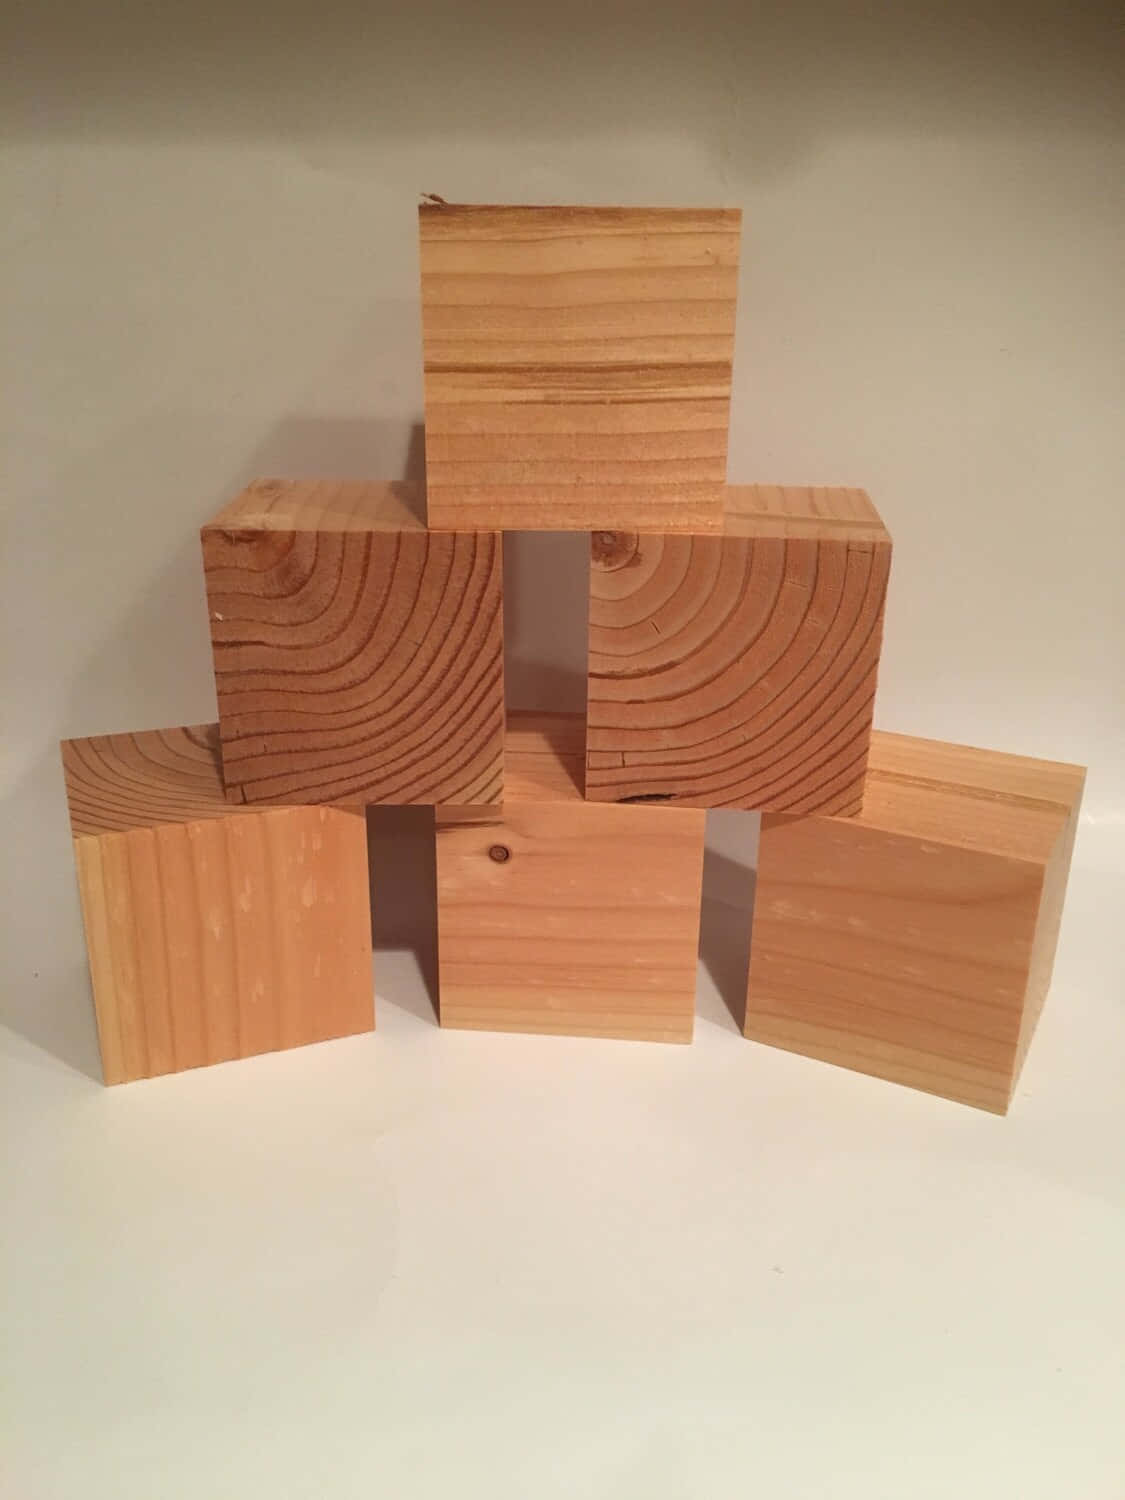 A Set Of Wooden Blocks With Different Designs